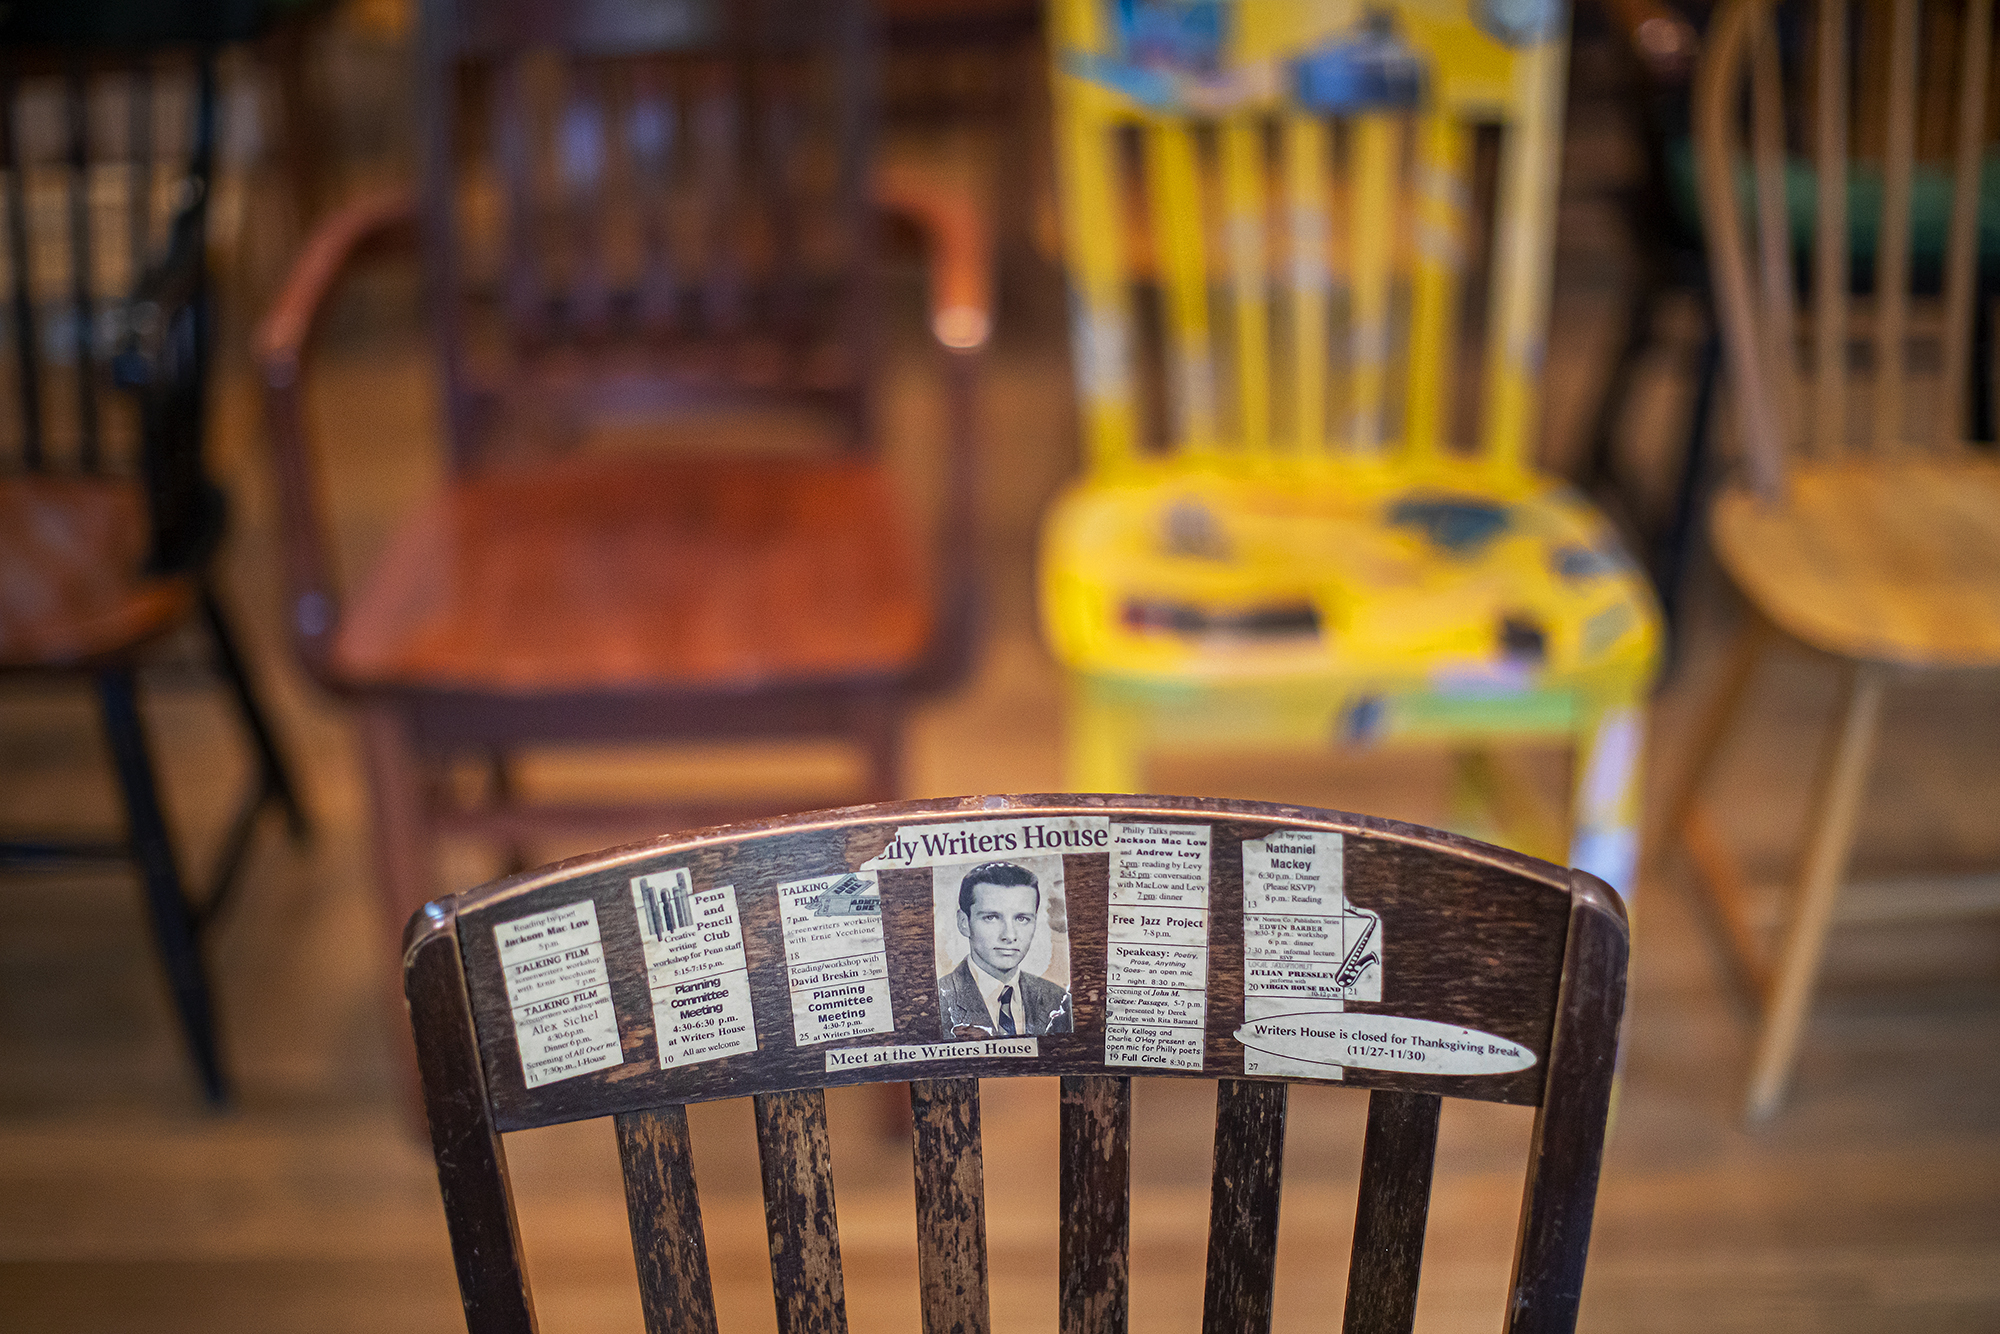 Top of the back of a wooden chair with newspaper articles and photos pasted on.